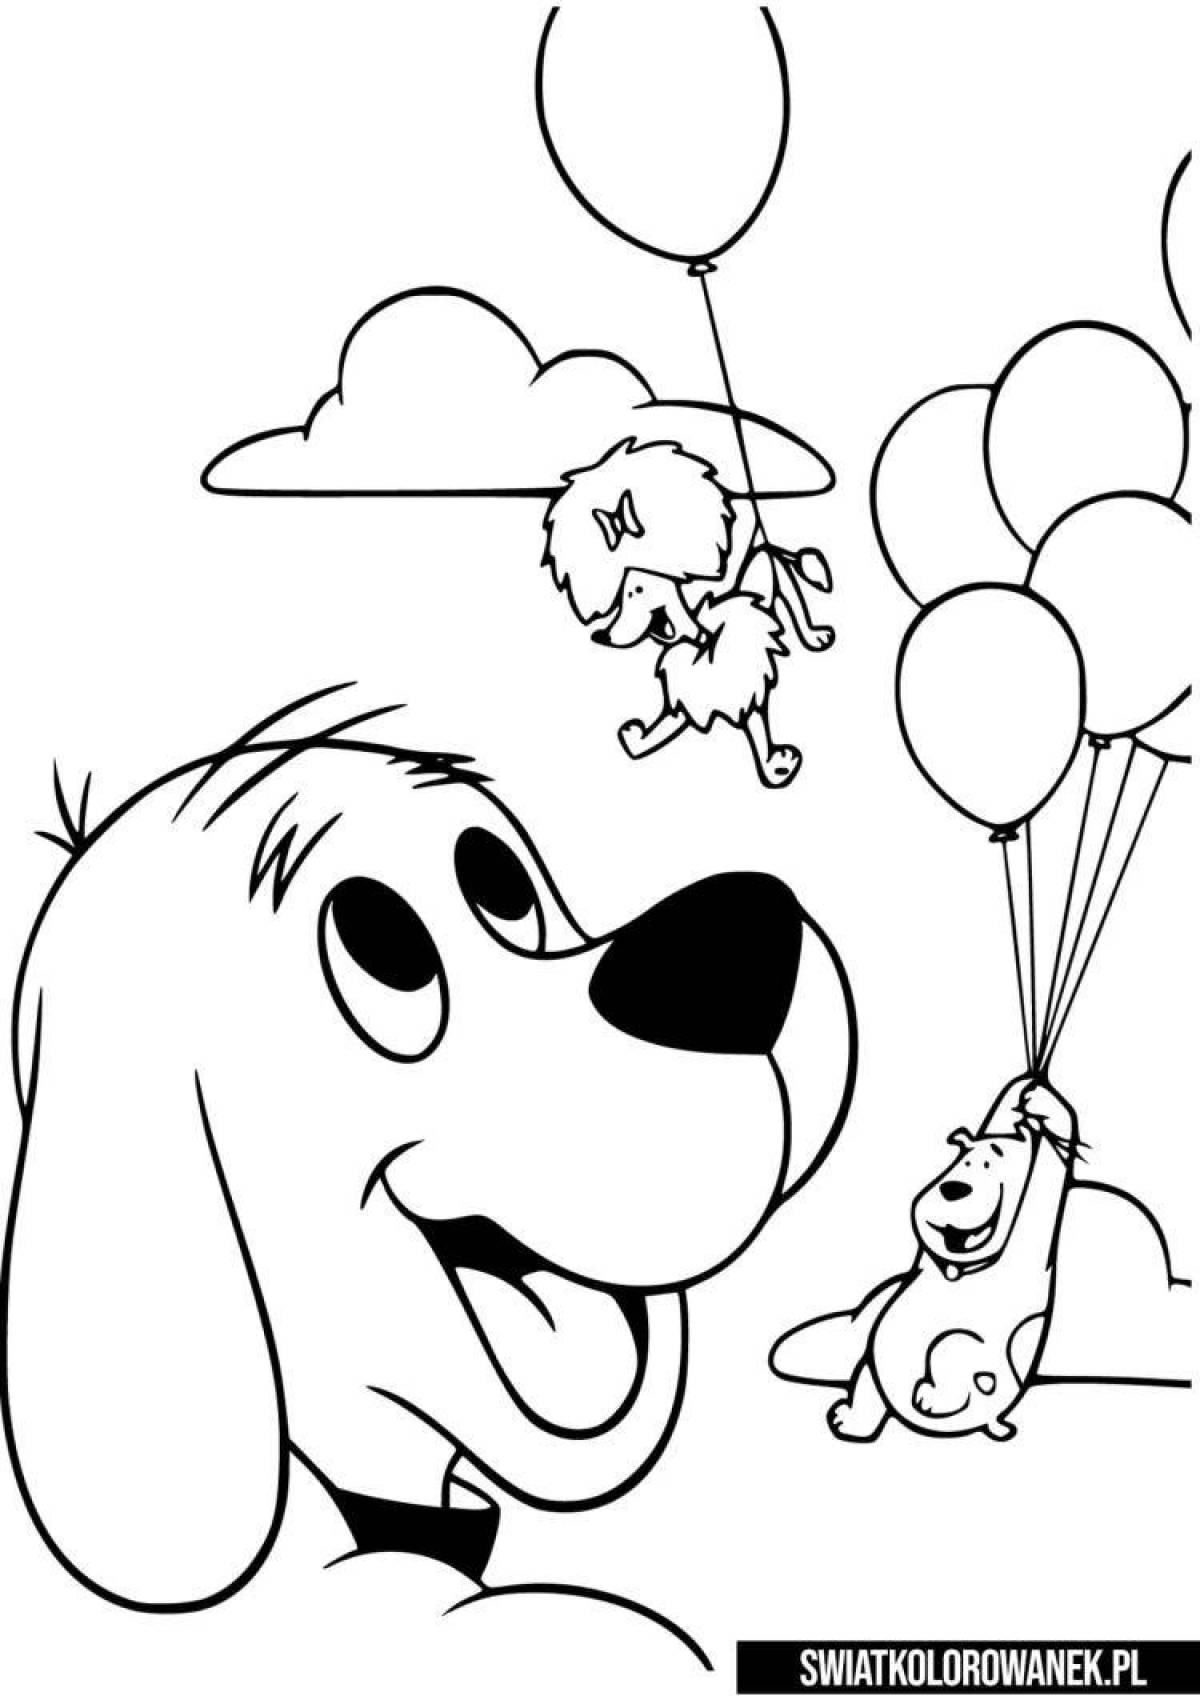 Charming clifford coloring page